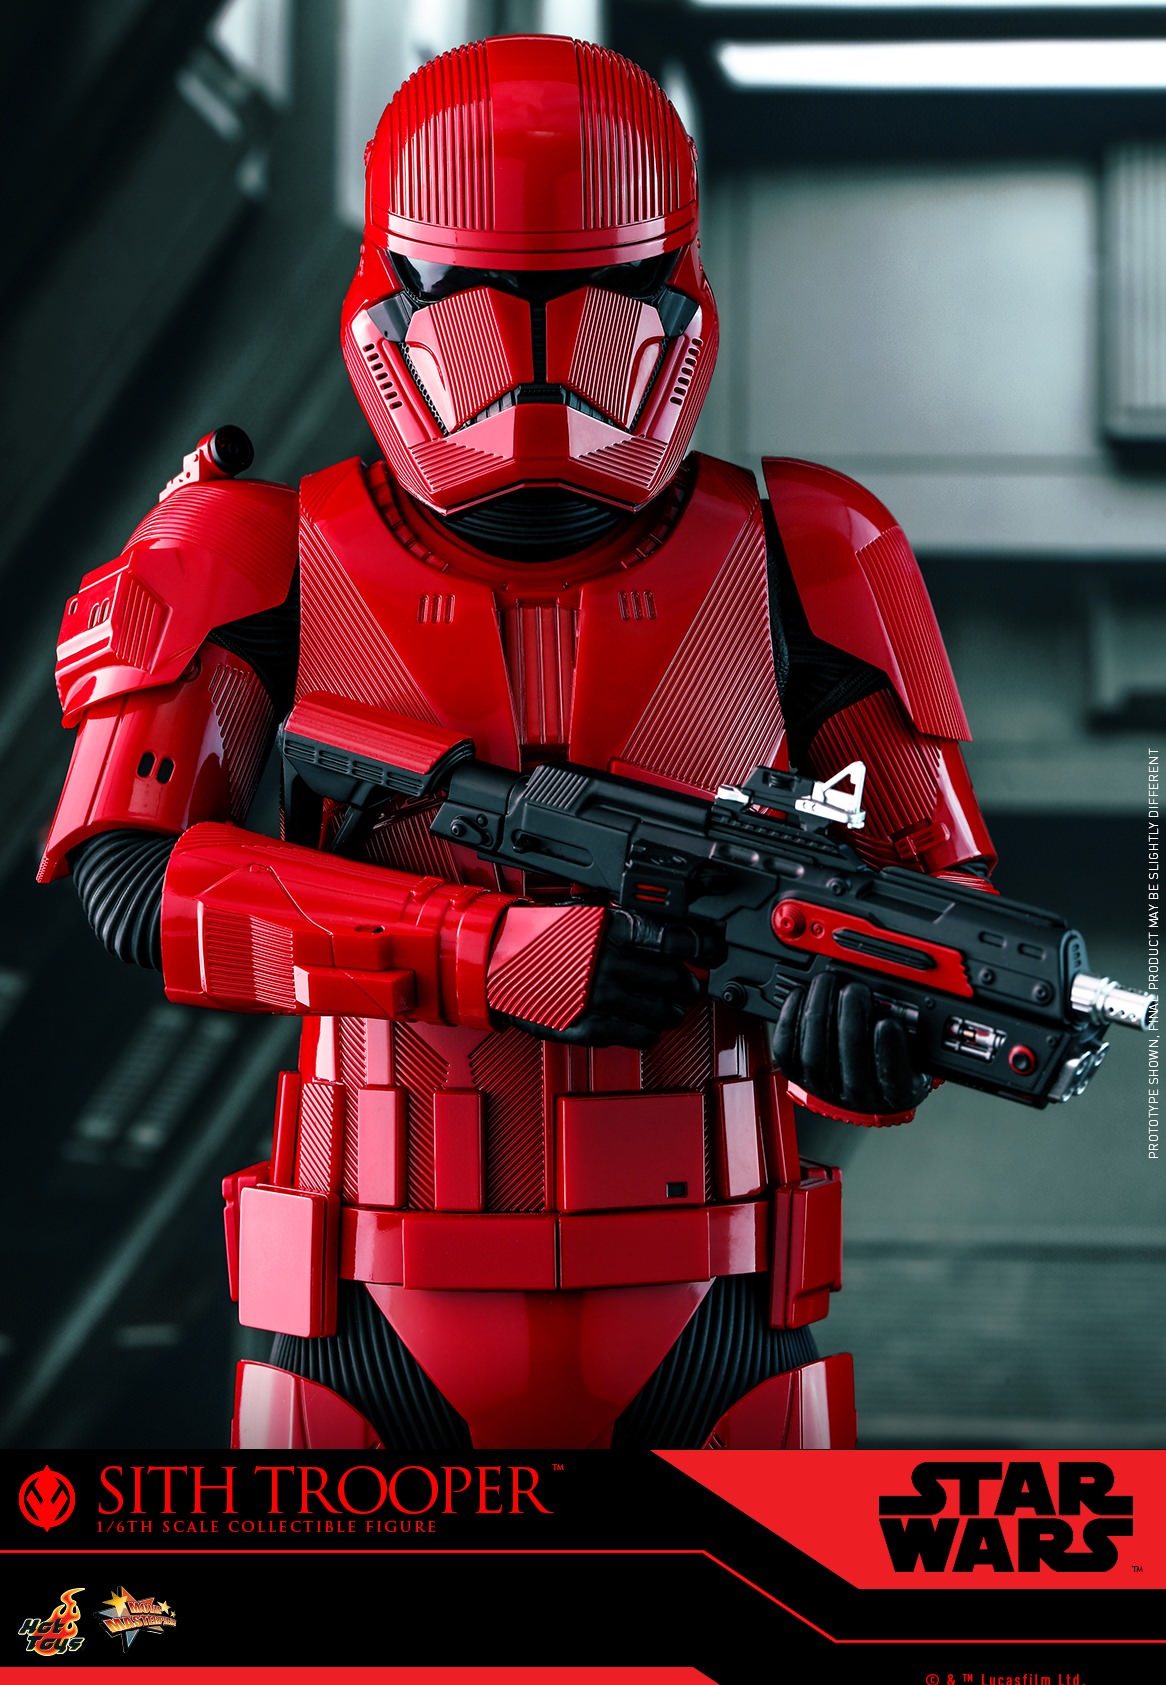 Sith Trooper 1/6 - Star Wars: The Rise of Skywalker Hot Toys